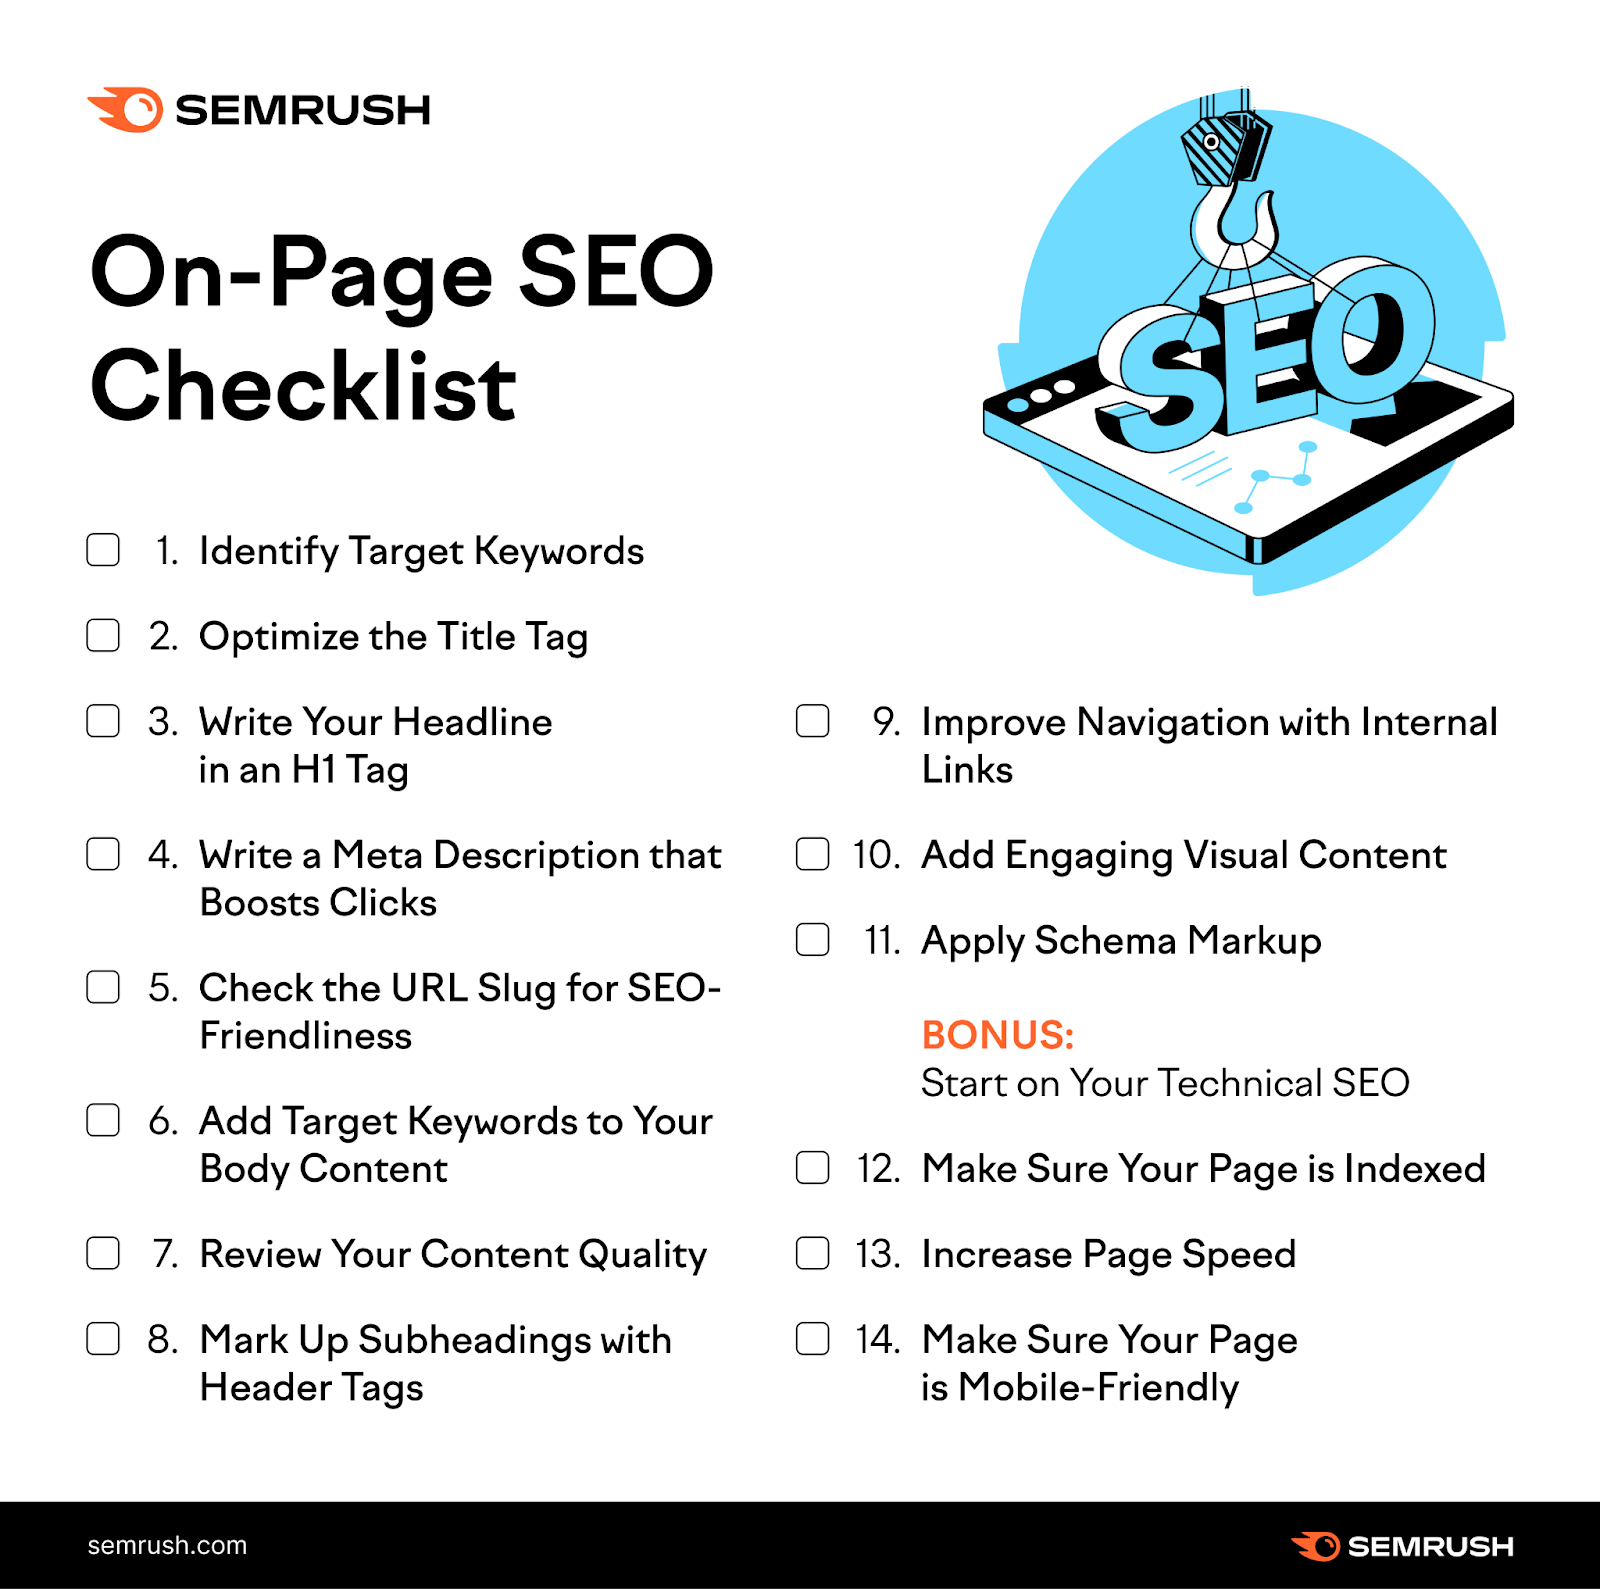 on page seo checklist includes identifying target keywords, optimizing title tag, and more